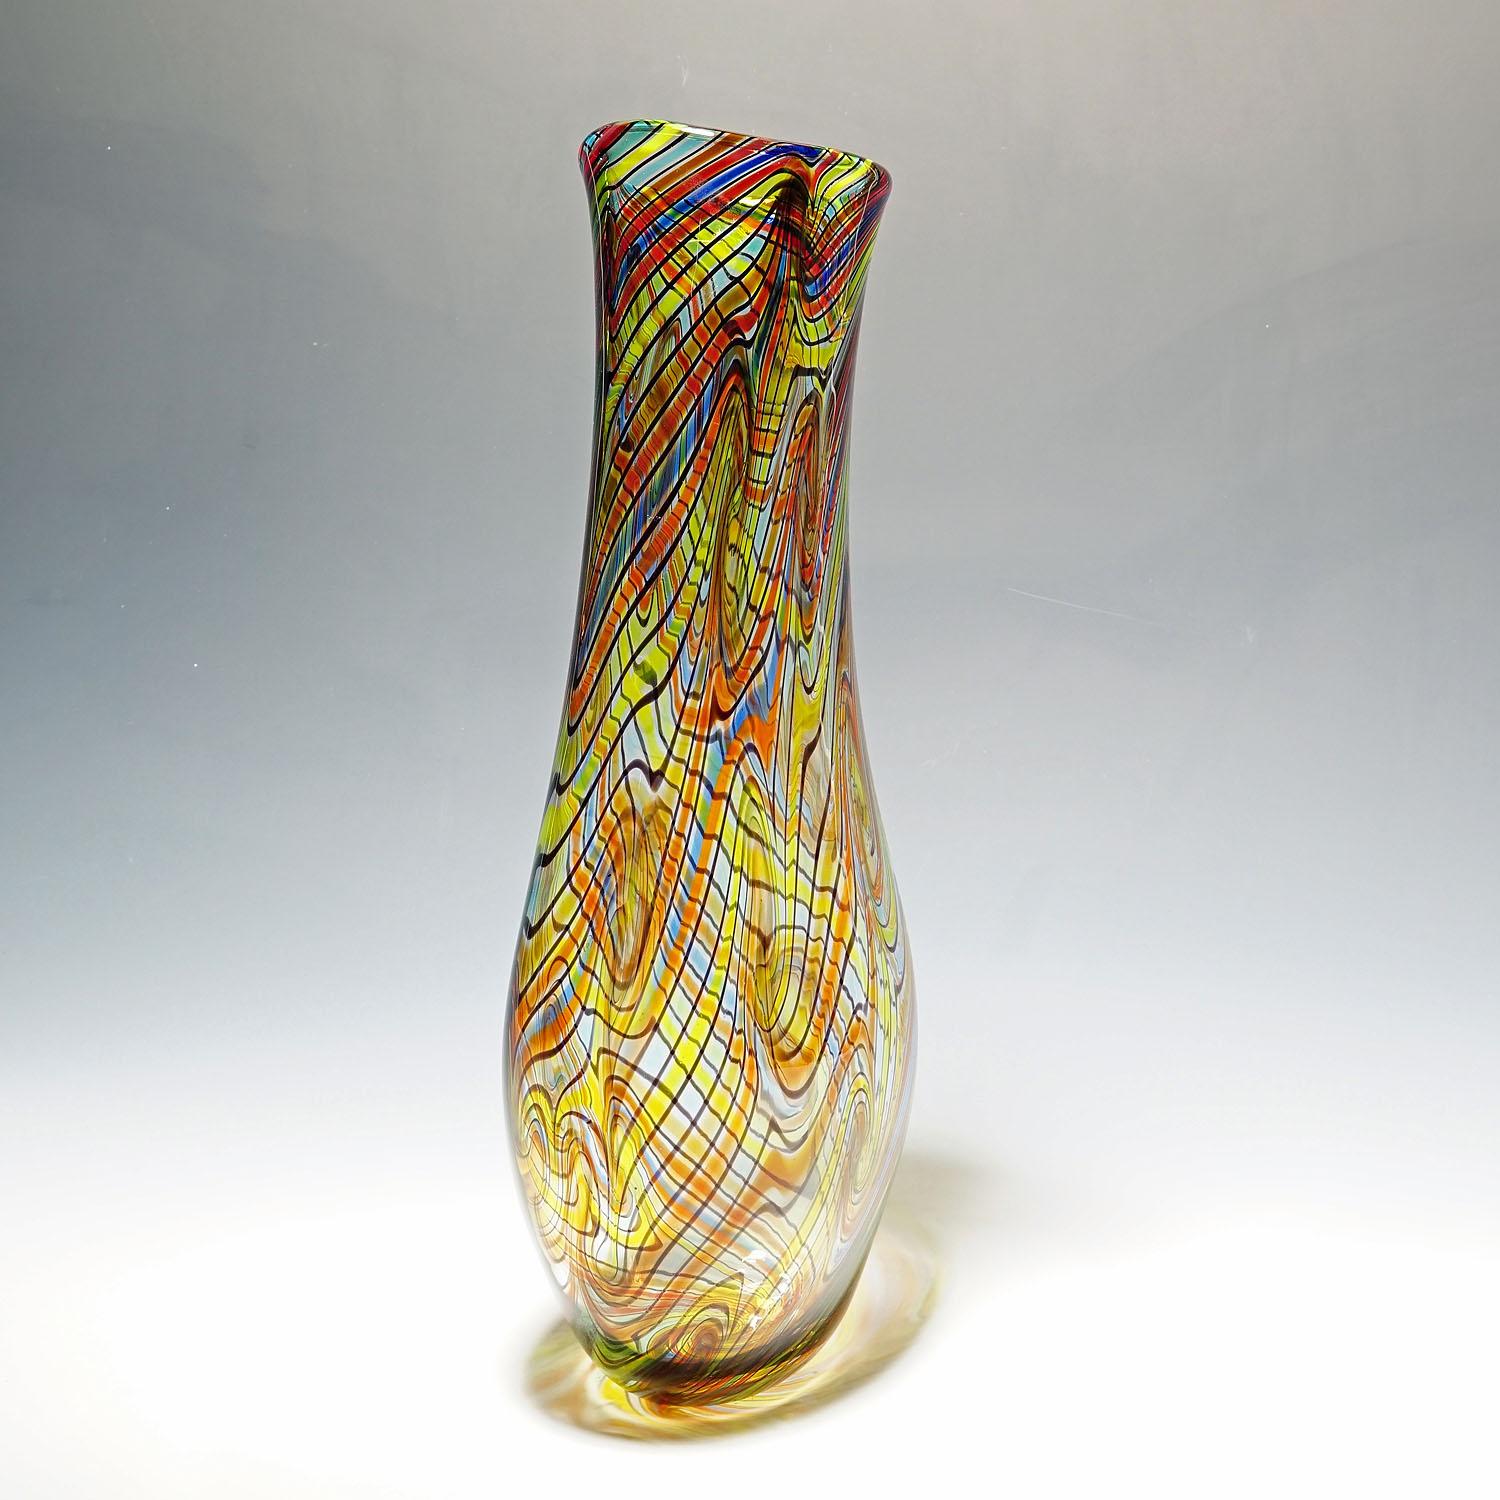 Monumental art glass vase by Luca Vidal, murano.

A large art glass vase handmade by glass master Gianluca Vidal early 2000s. Free formed clear glass body internaly decorated with colorful treads drawn in waves. Signed with 'Vetro Artistico Murano'